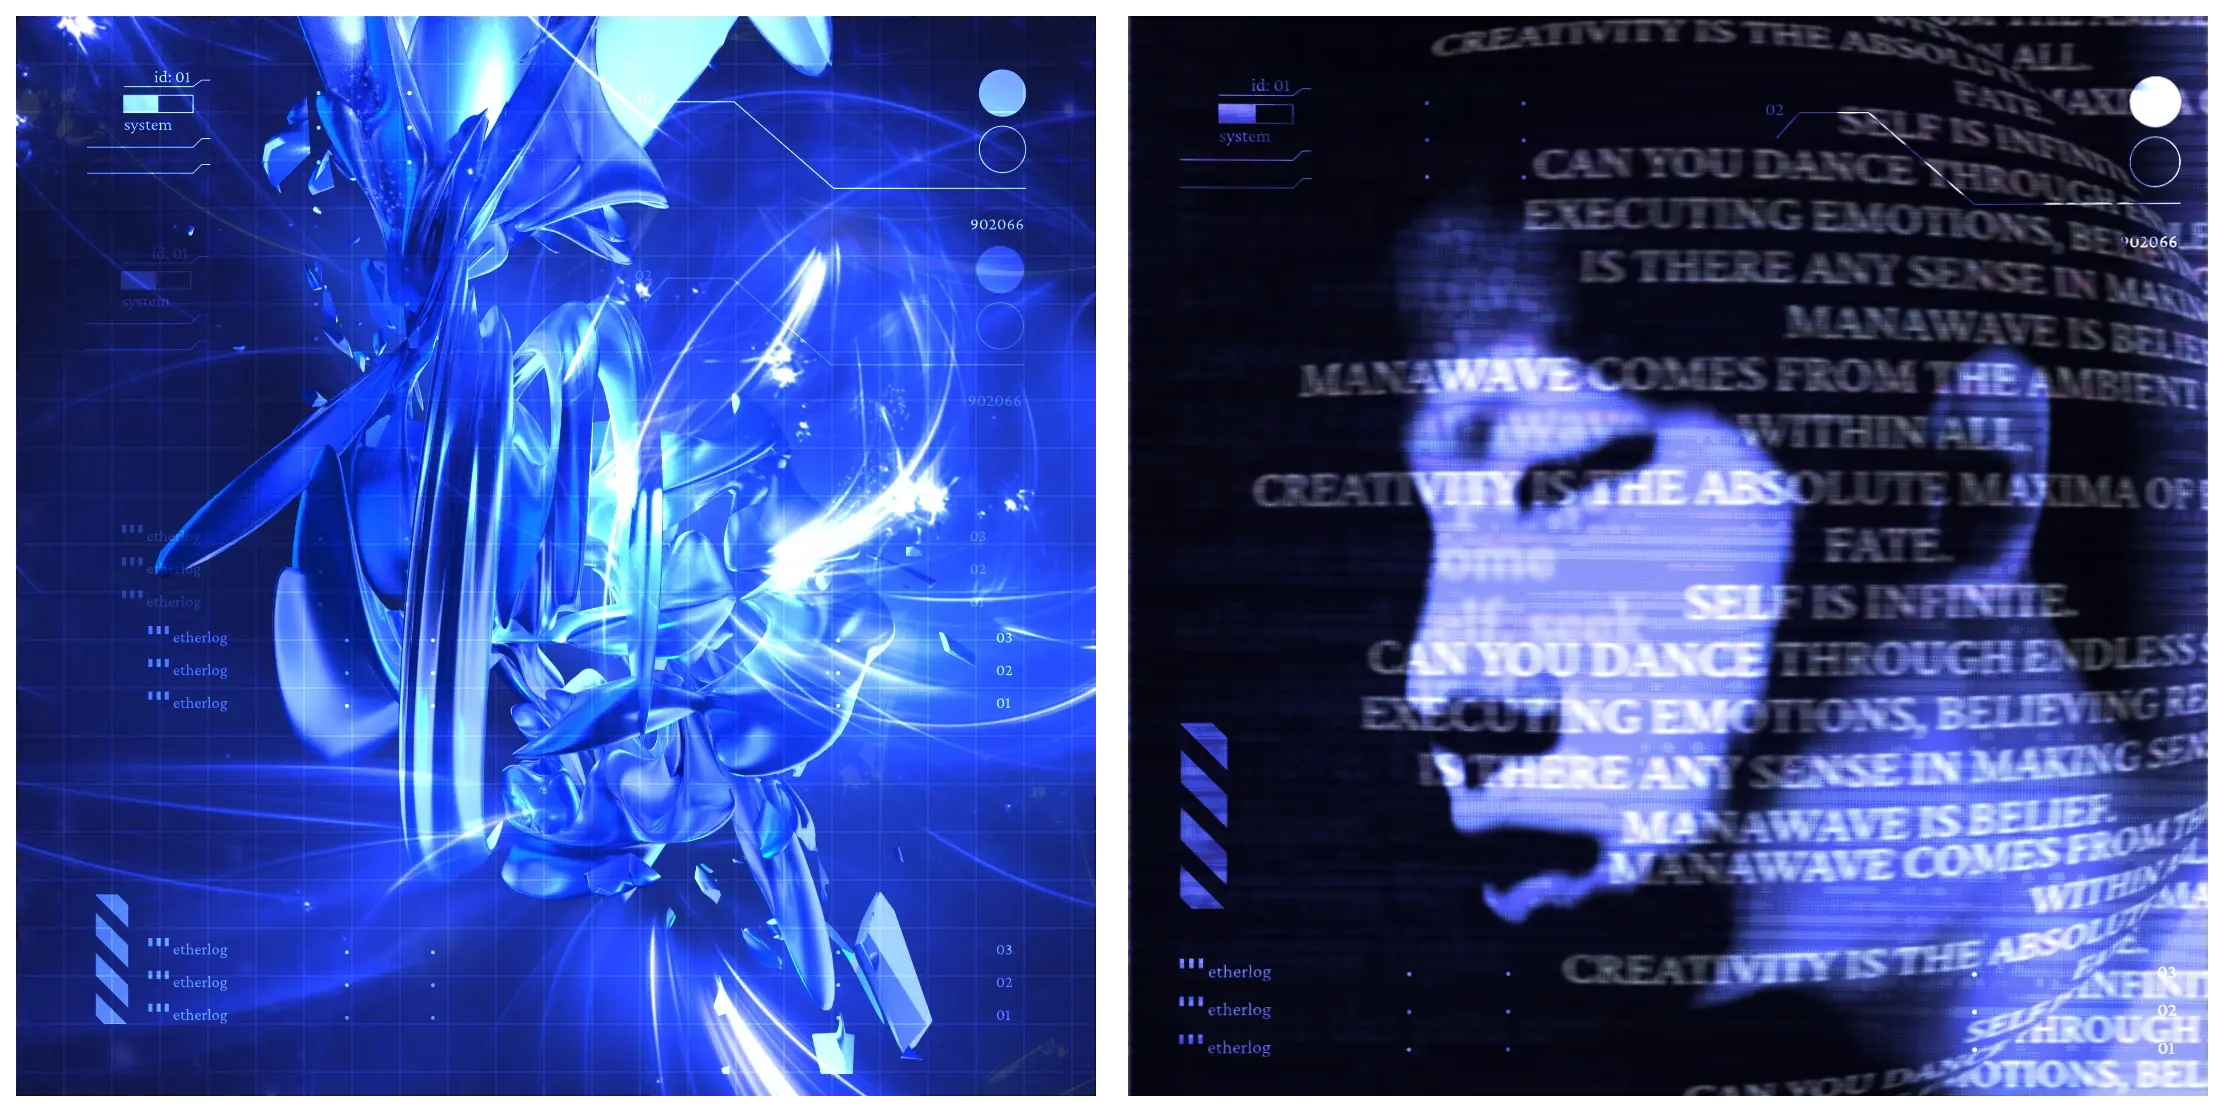 There are two pictures. Blue metalheart sculpture on the left with swirling lights, energy, and futuristic user interface parts. On the right, a purple-blue tinted face lit in darkness with warped text overlaid